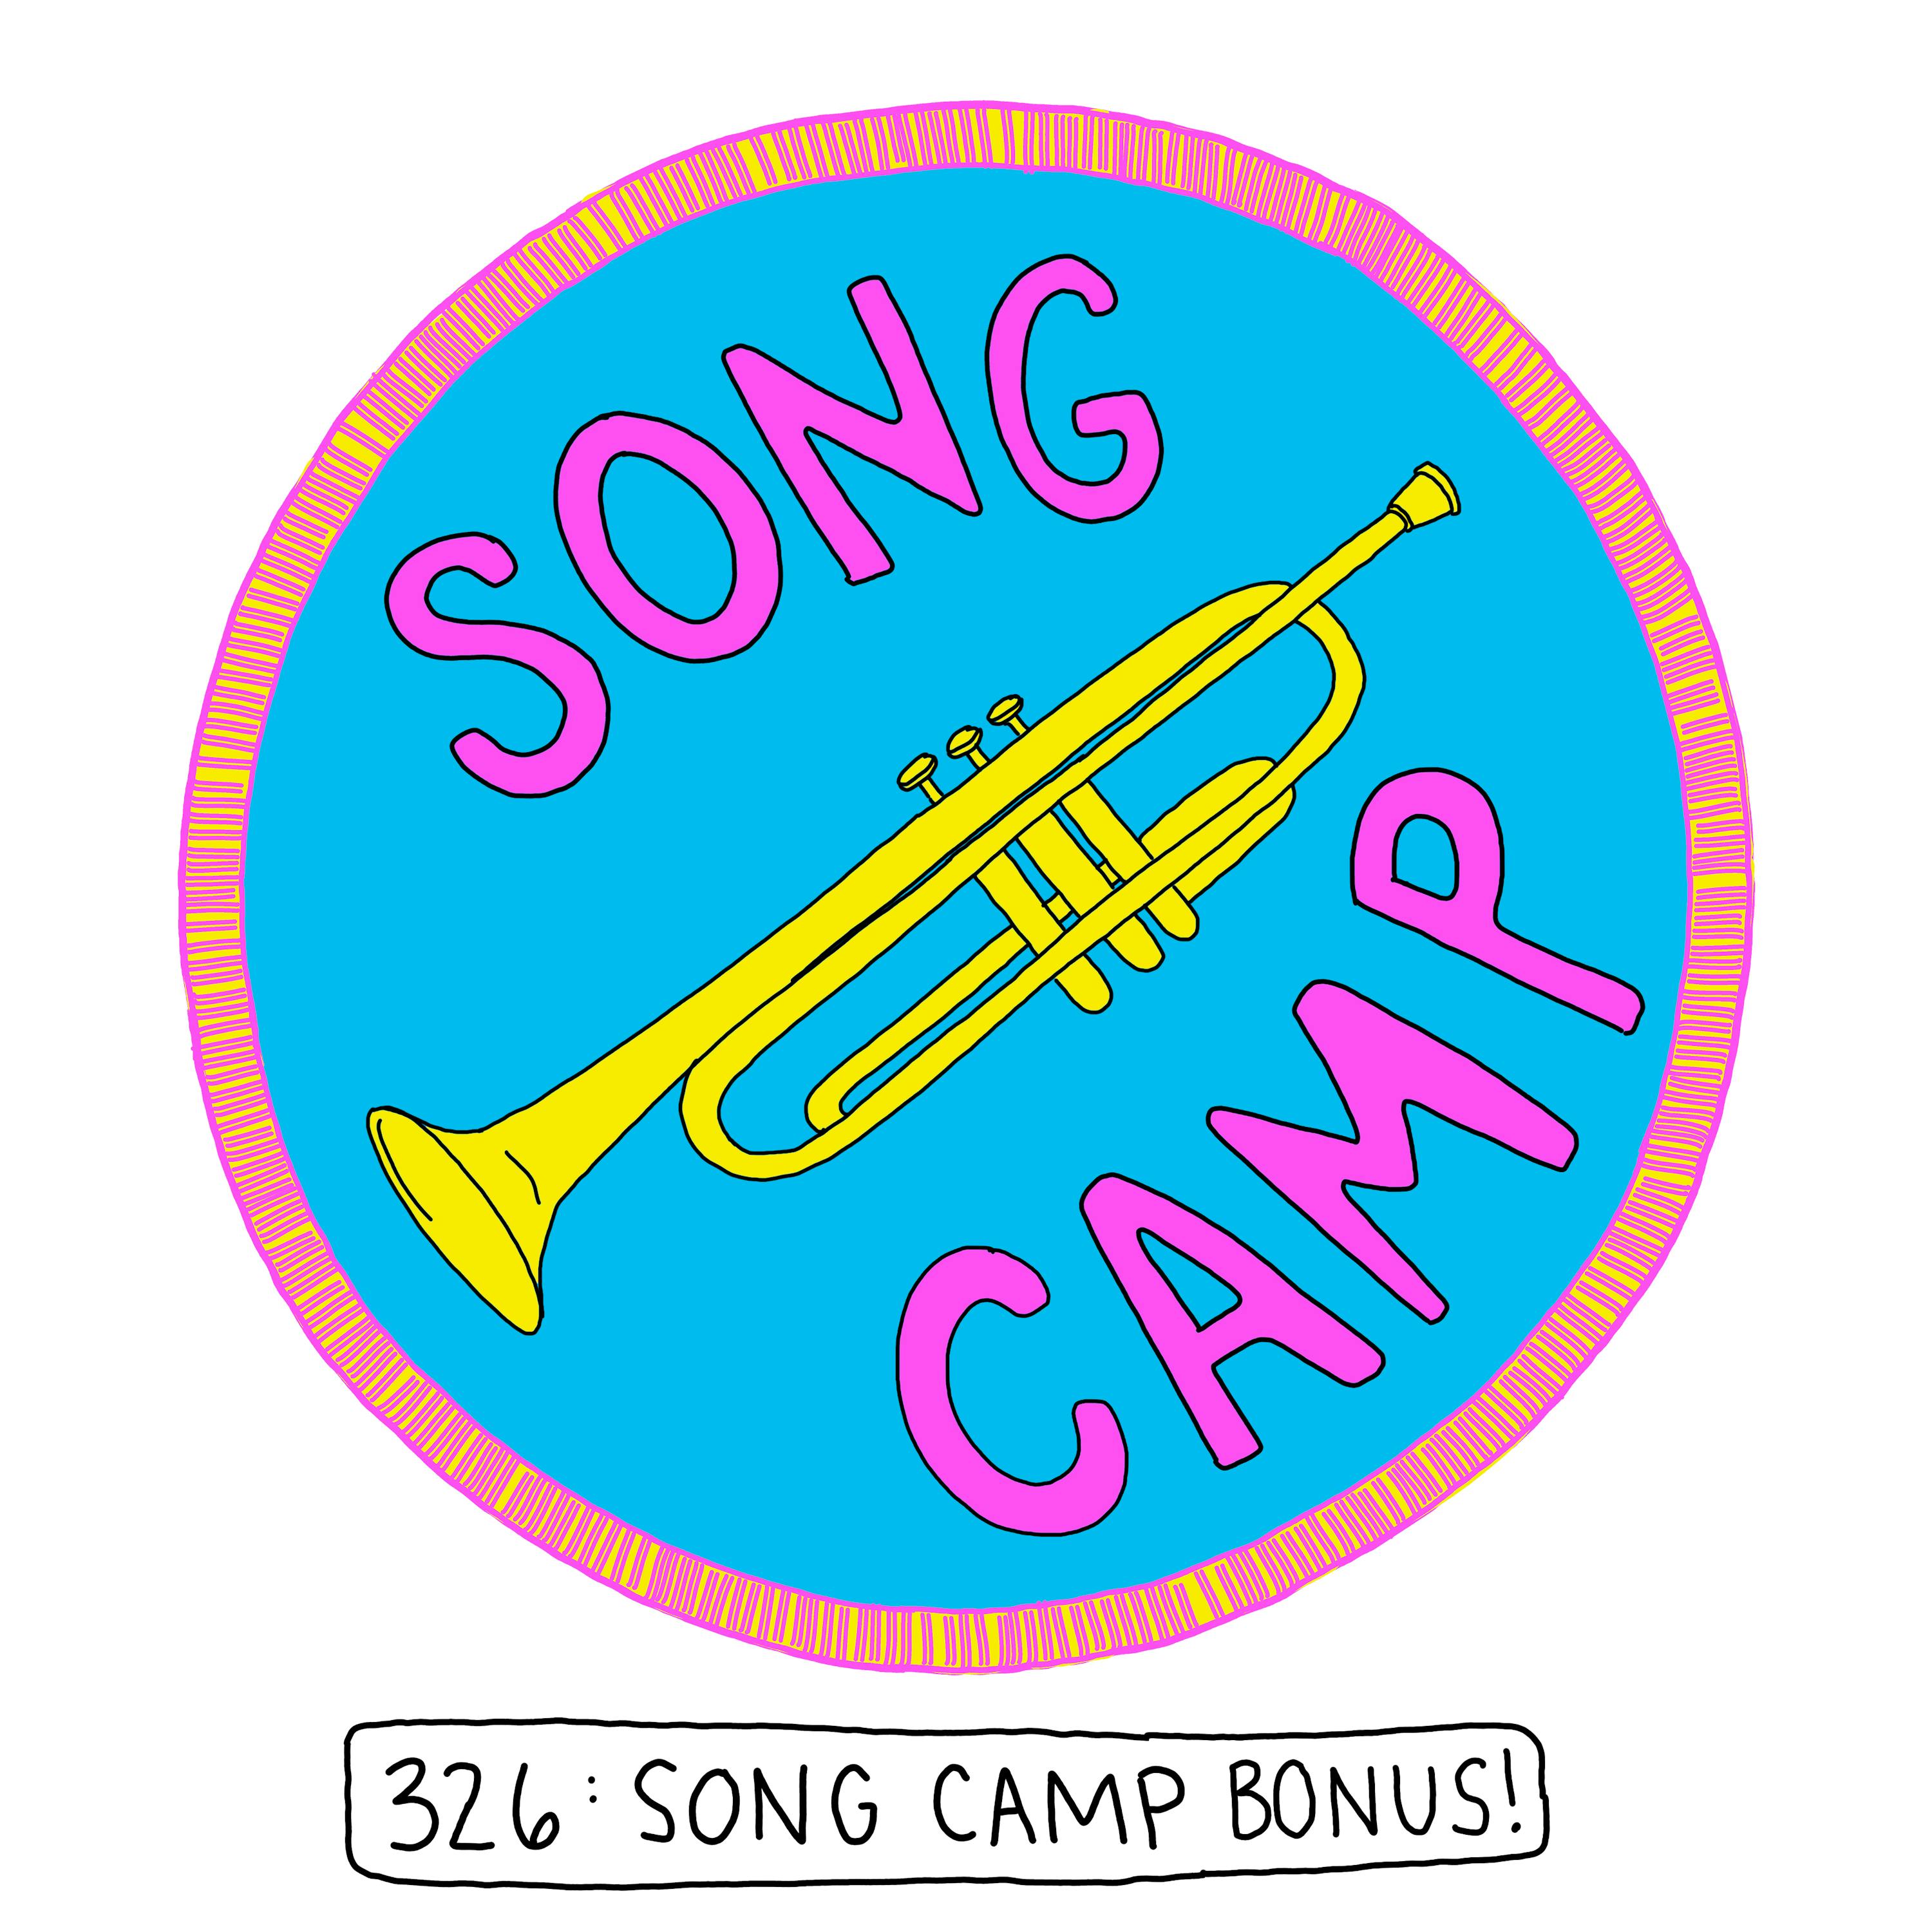 Song Camp 2: Electric Boogaloo! (with Alex Tumay, Wolftyla, Nicholas Petricca, Grace VanderWaal)